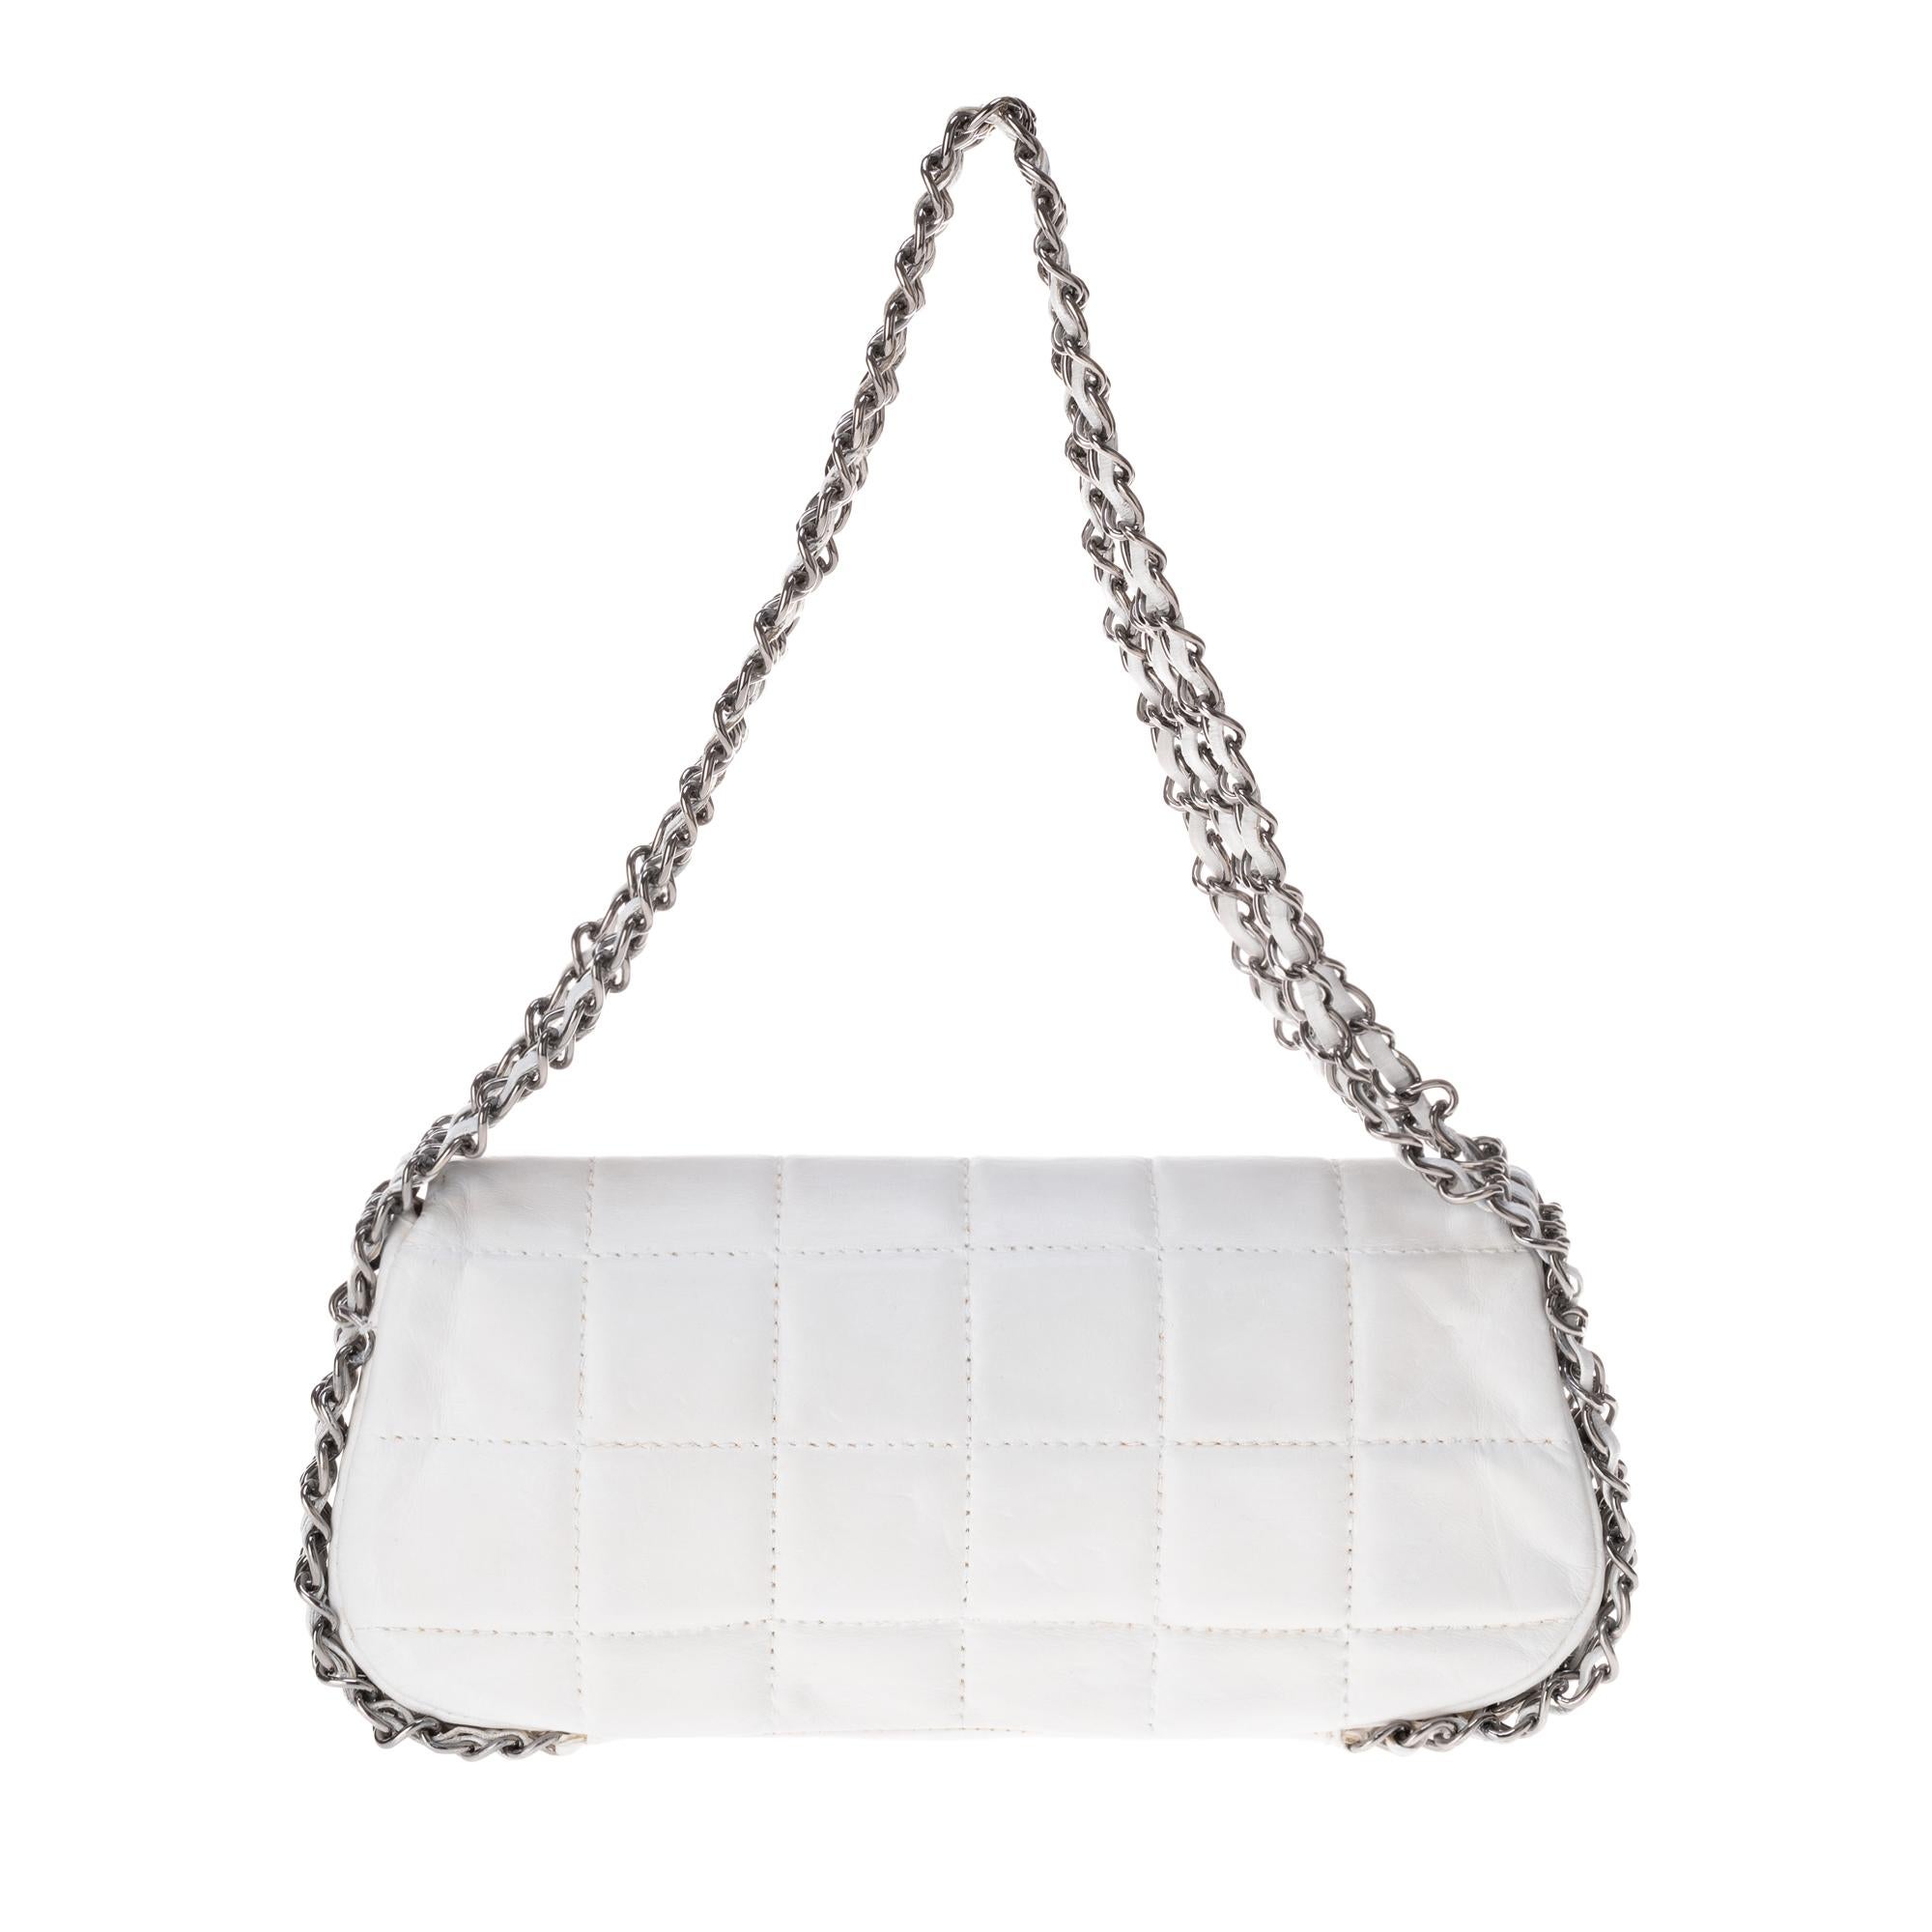 Stunning Chanel Handbag in white quilted lambskin and triple silver ...